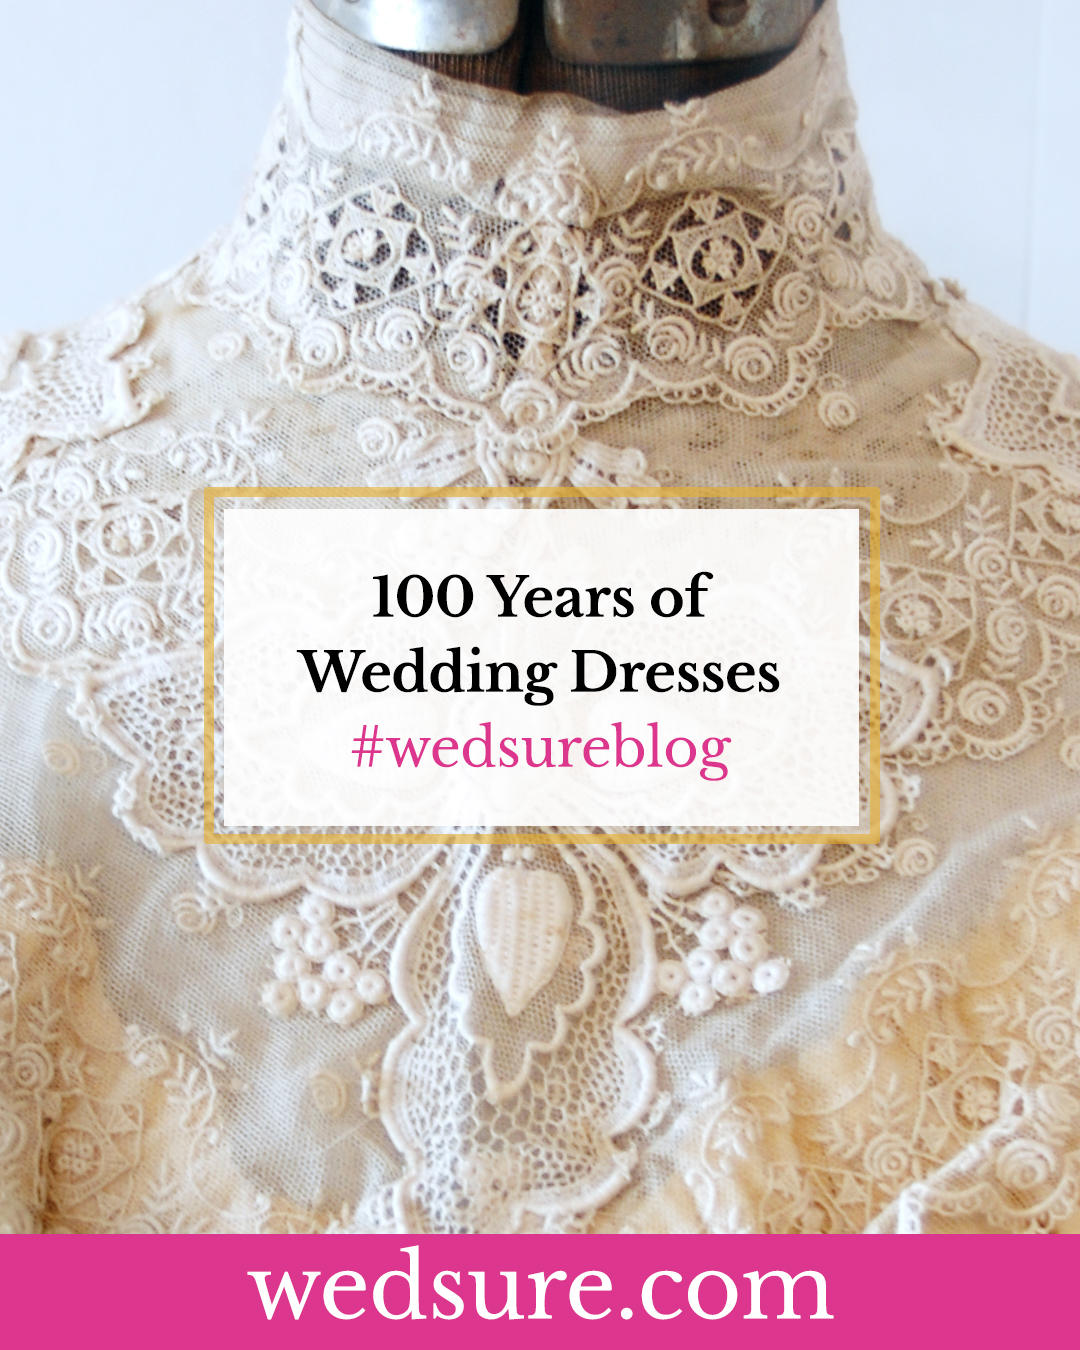 100 Years of Wedding Dresses in Under 5 Minutes